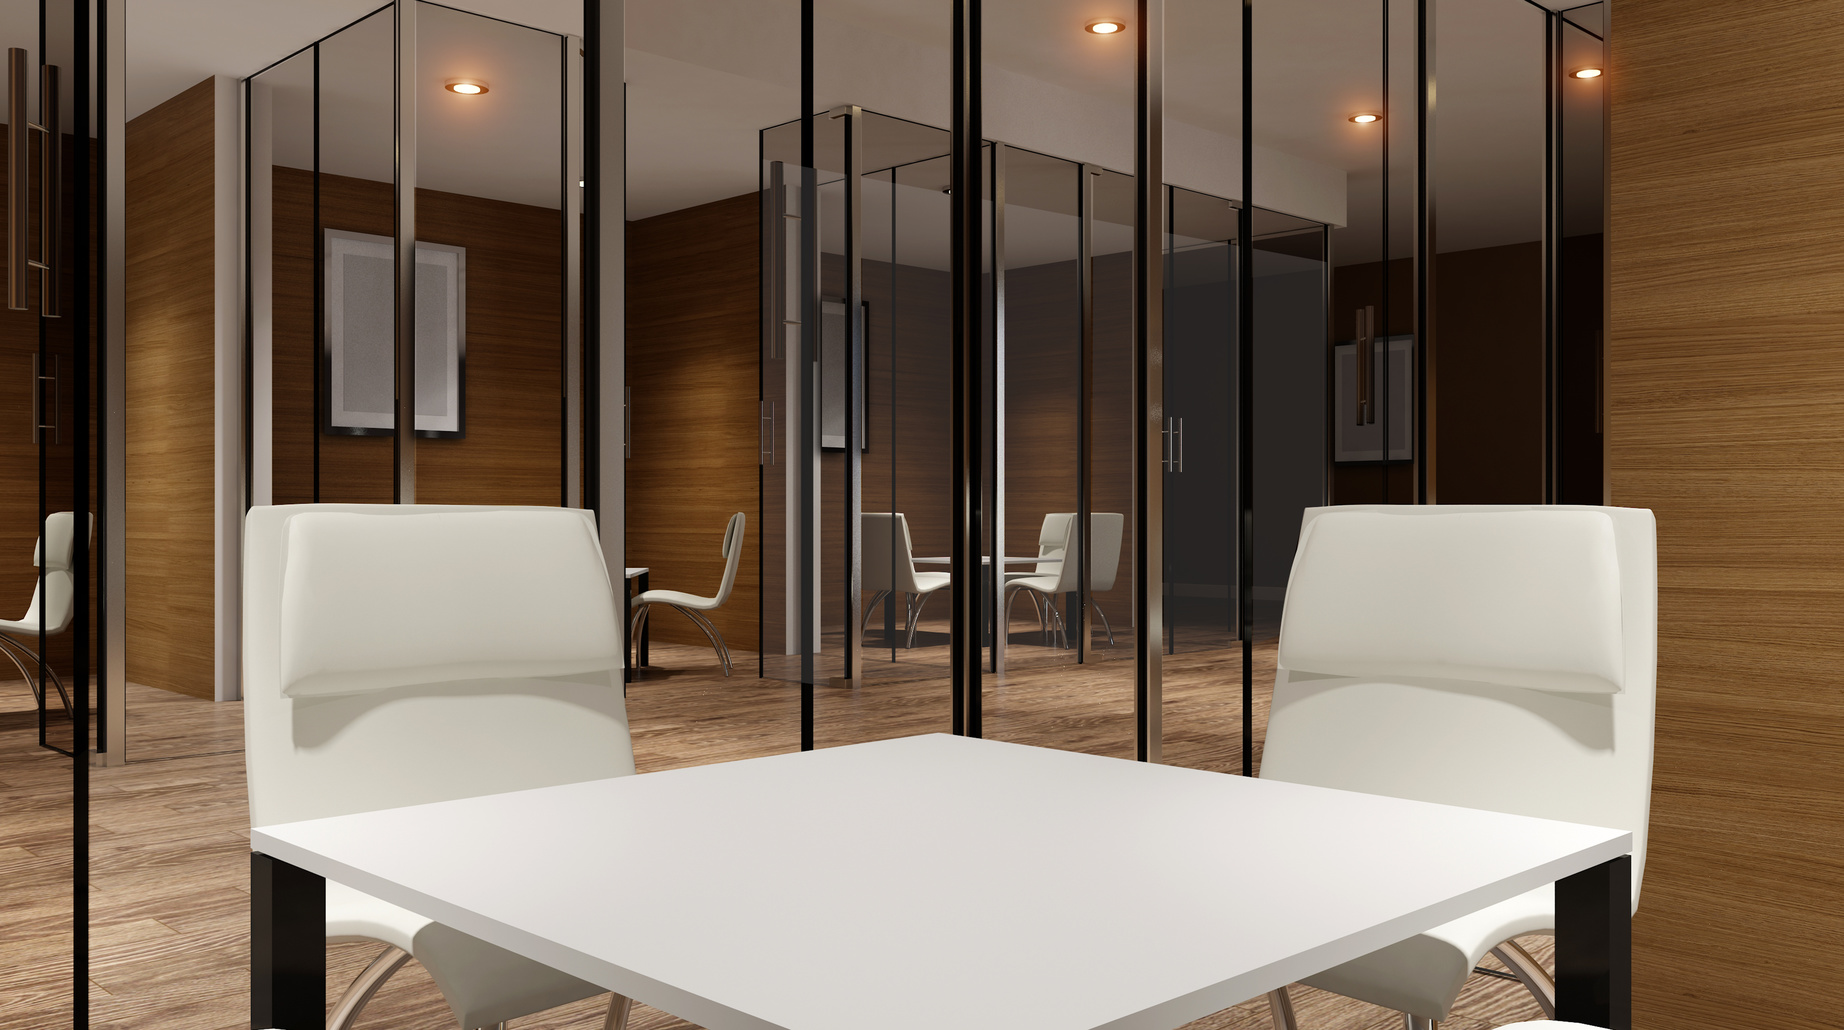 Meeting room. The Conceptual offices. Office array. 3d rendering.